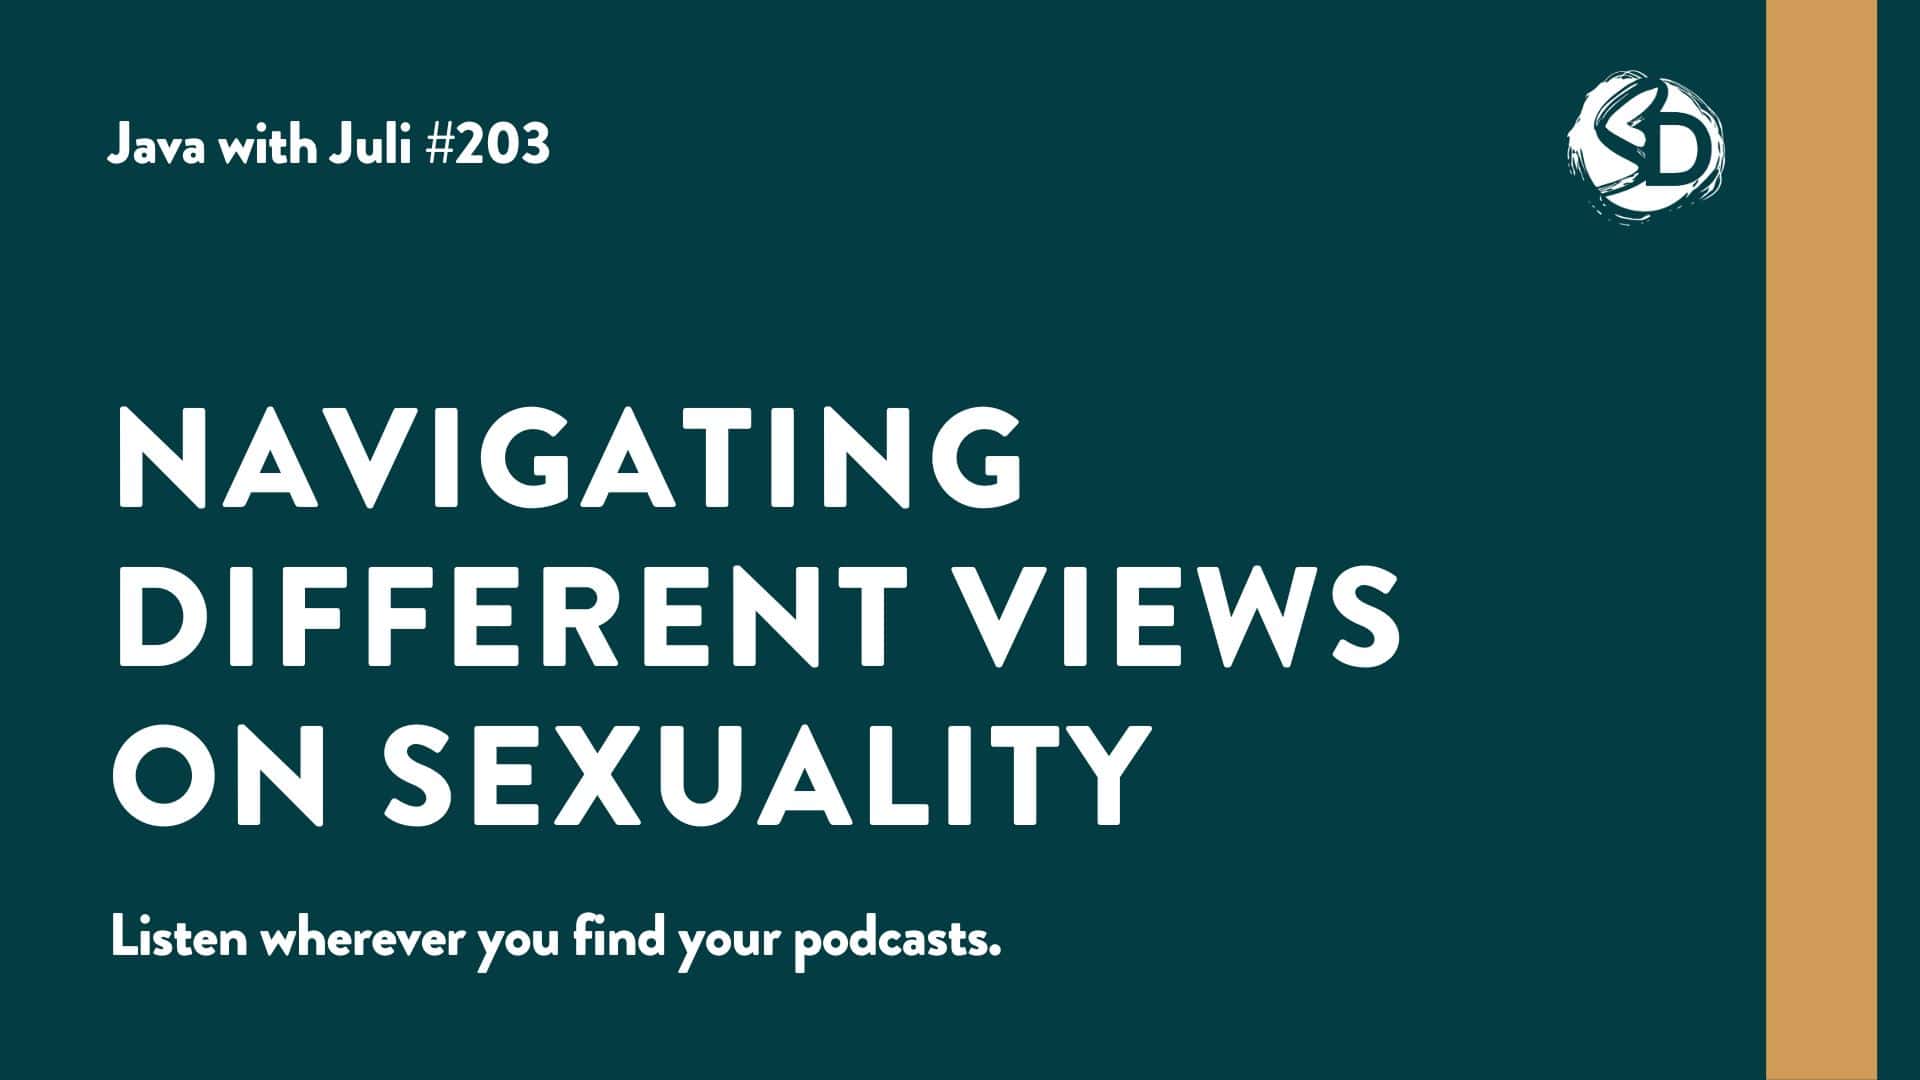 #203: Navigating Different Views on Sexuality